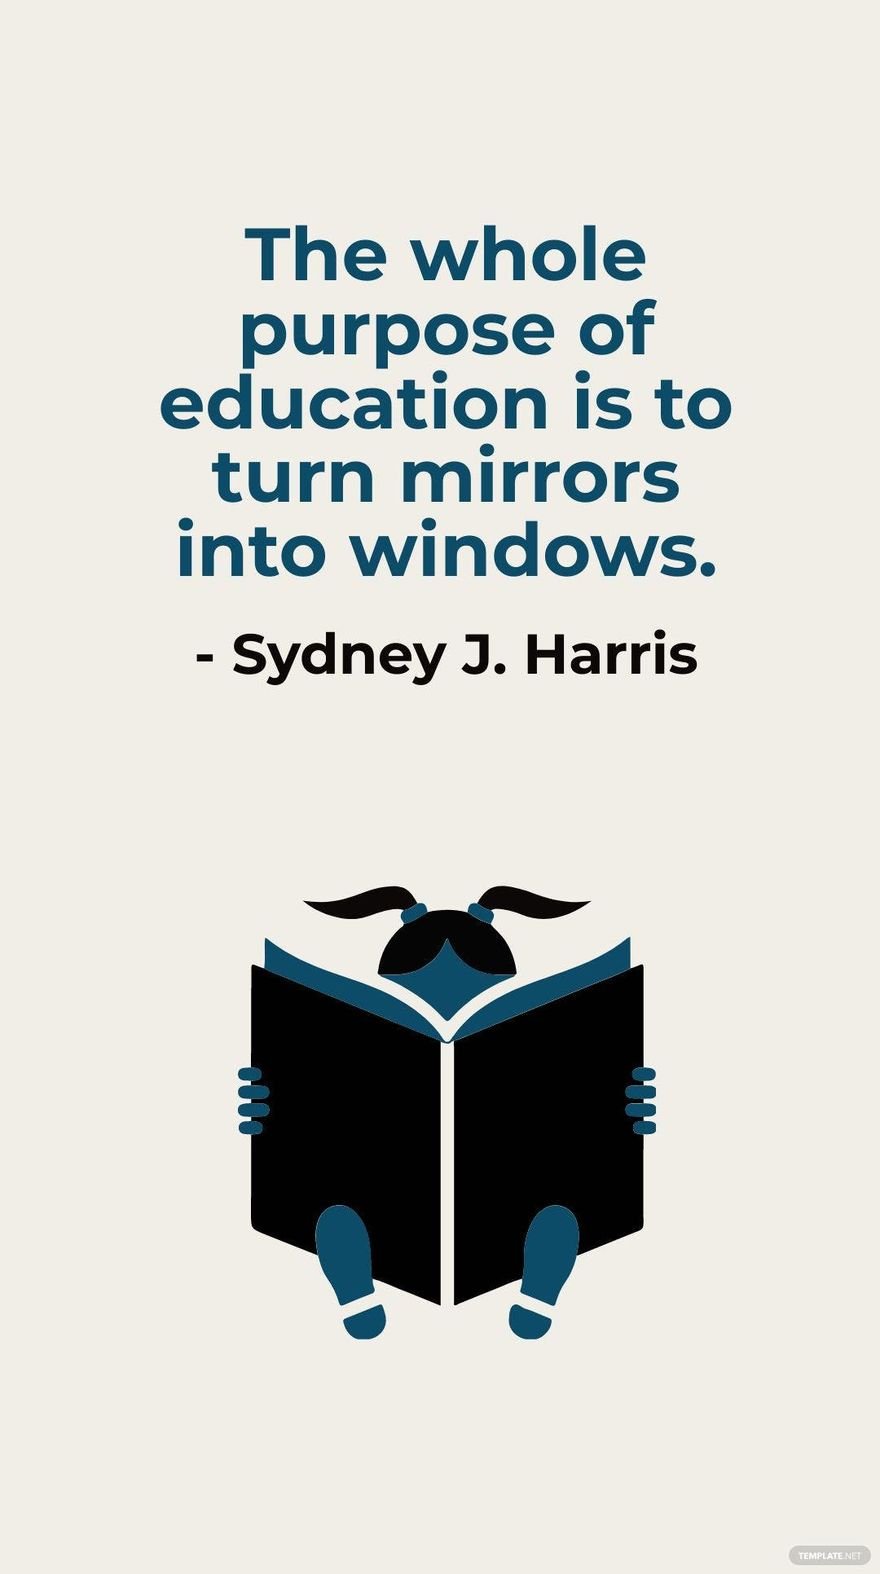 Sydney J. Harris - The whole purpose of education is to turn mirrors into windows.